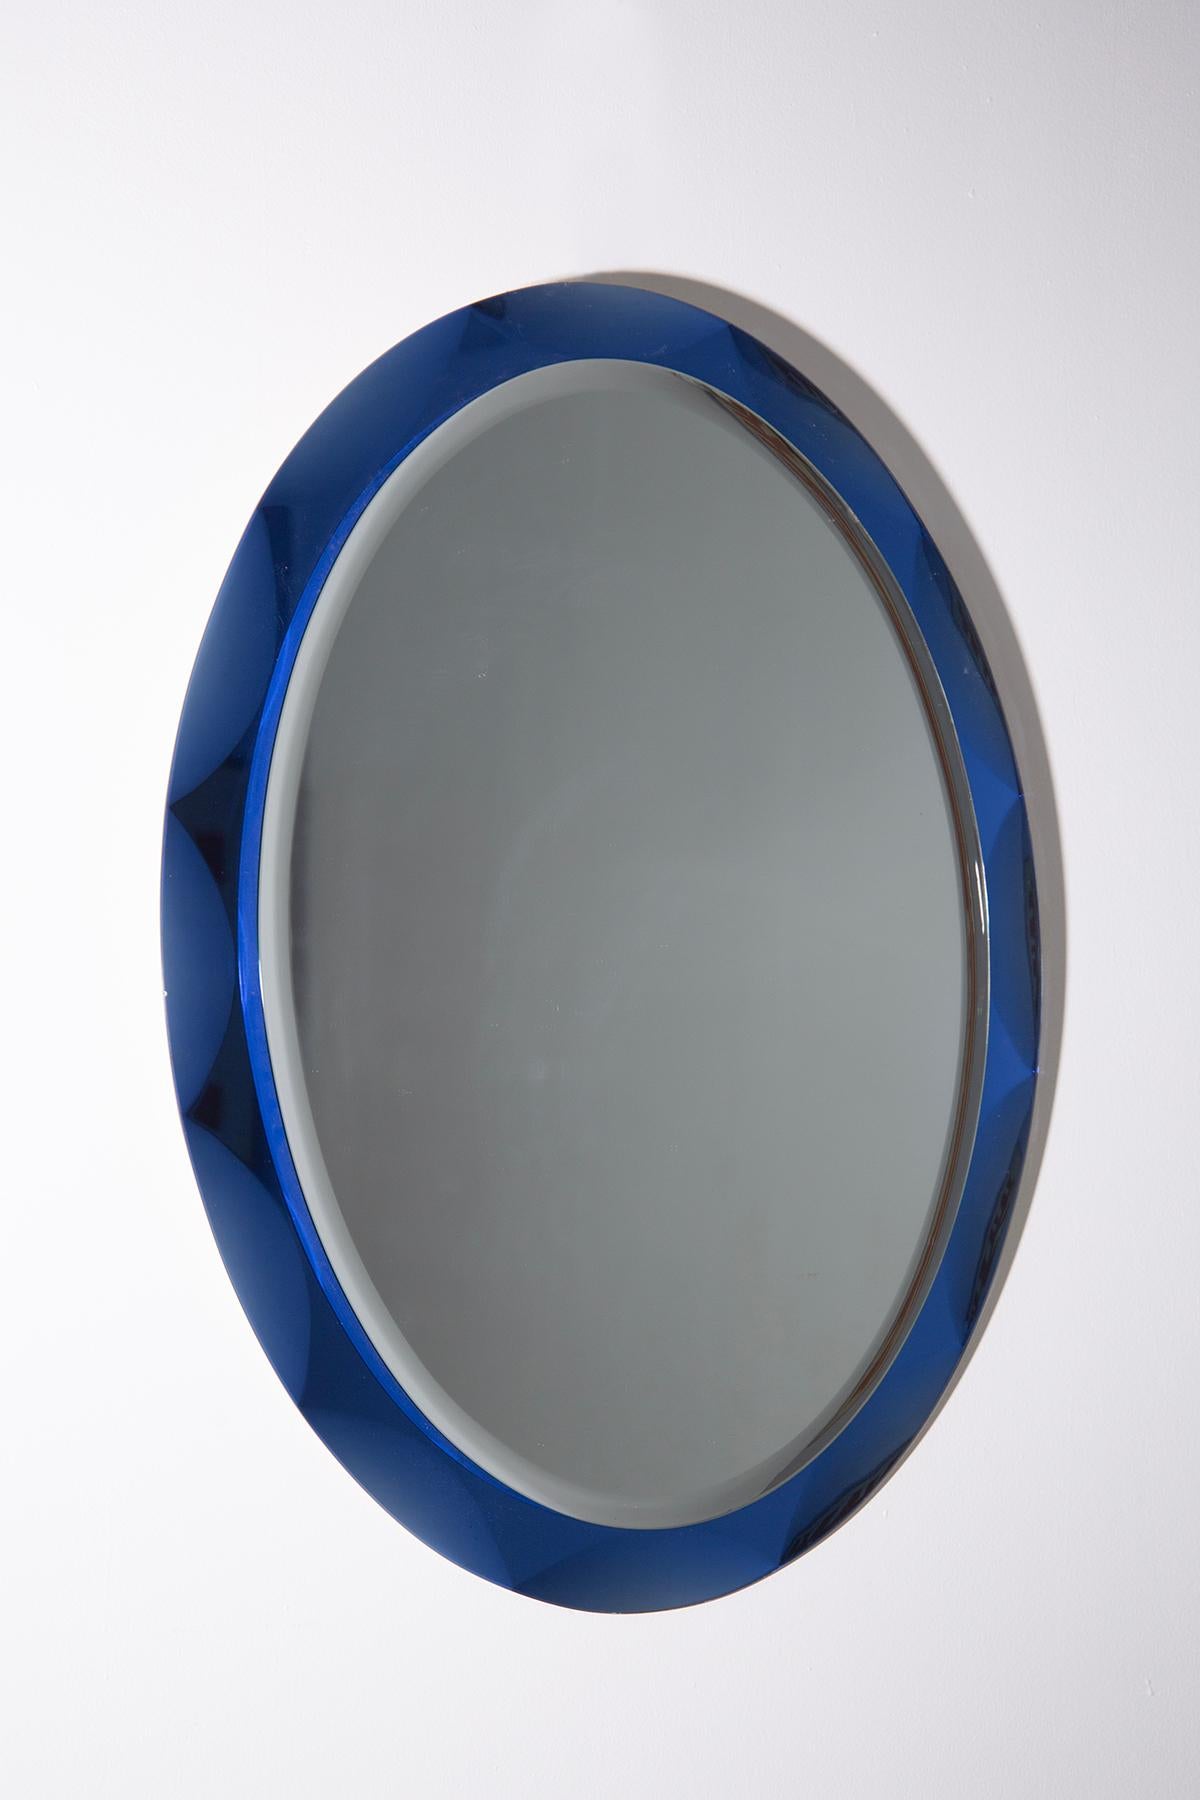 An exquisite wall mirror by MetalVetro Galvorane, crafted in the historic town of Siena, Italy, circa 1975, epitomises the timeless elegance of Italian design. The mirror, with its sinuously shaped oval form, commands immediate attention upon